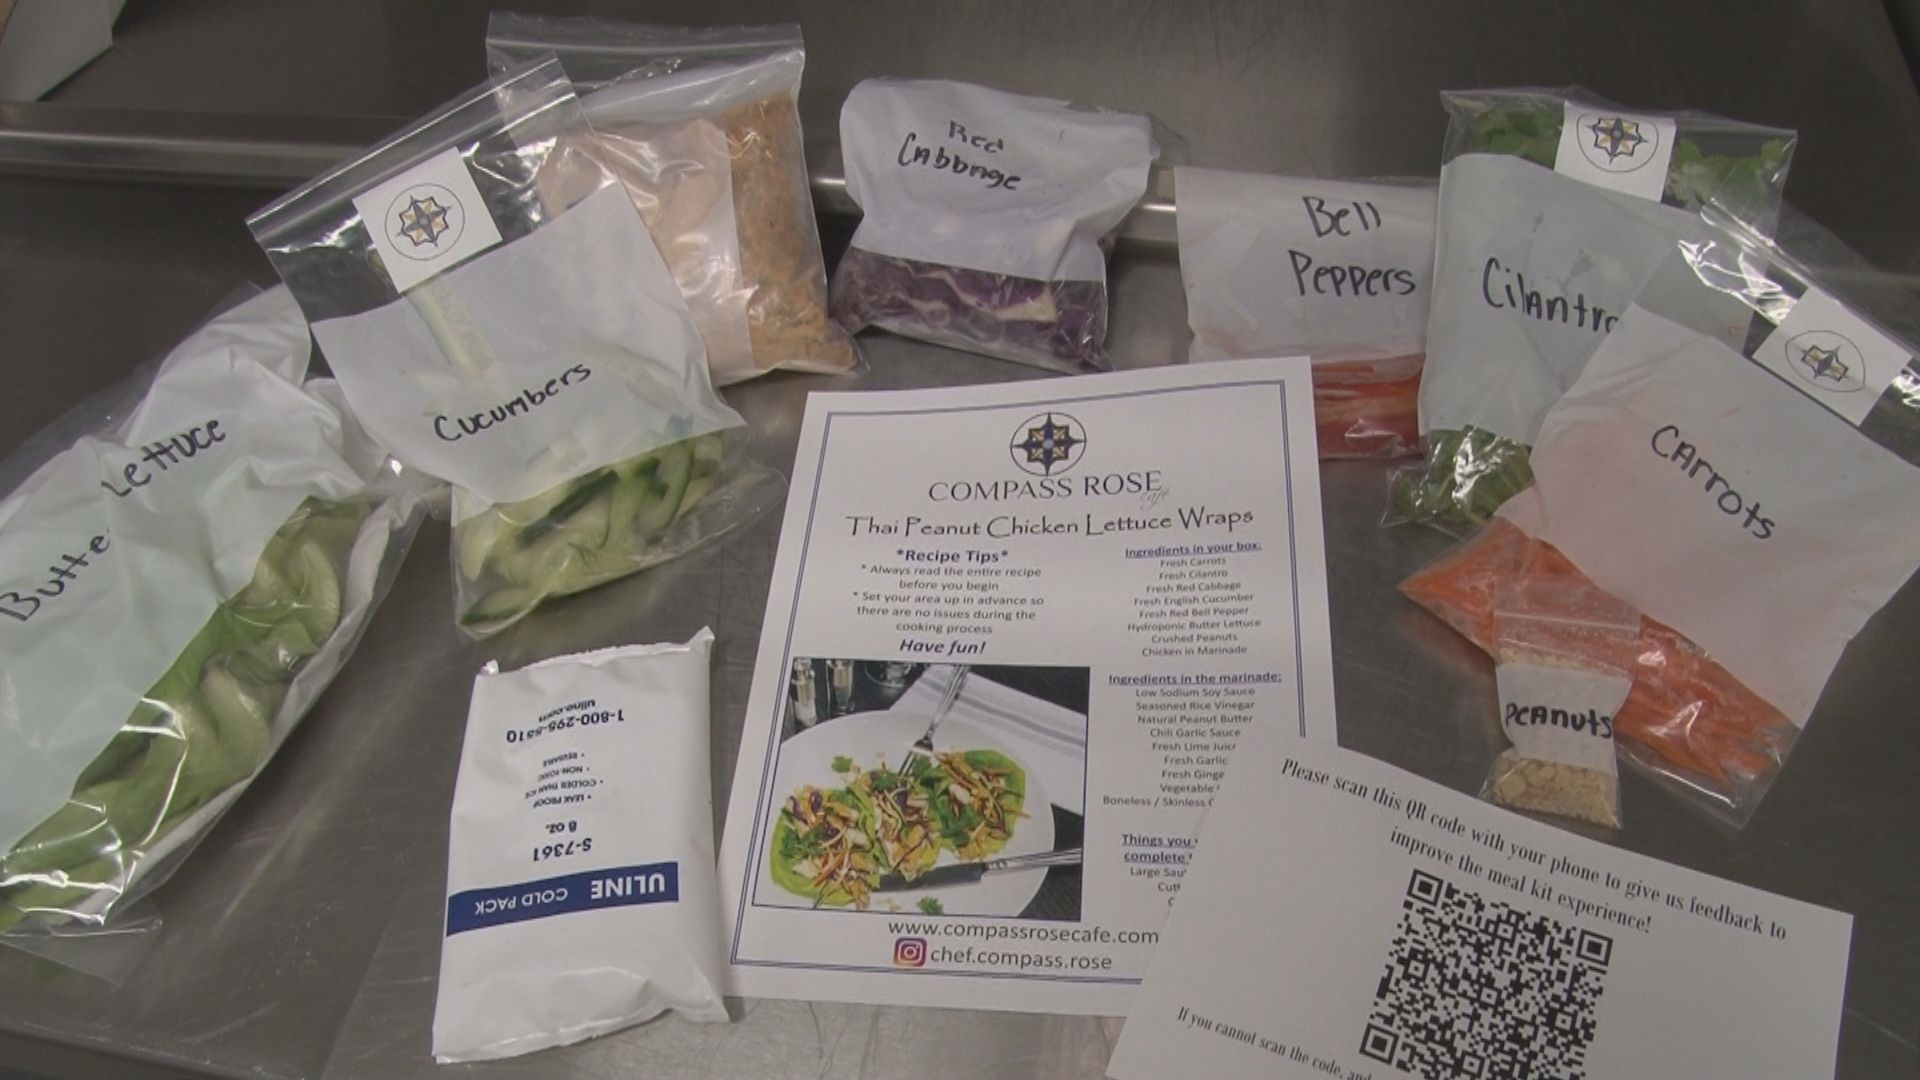 Culinary students have found another way to keep business going during a pandemic by preparing meal kits